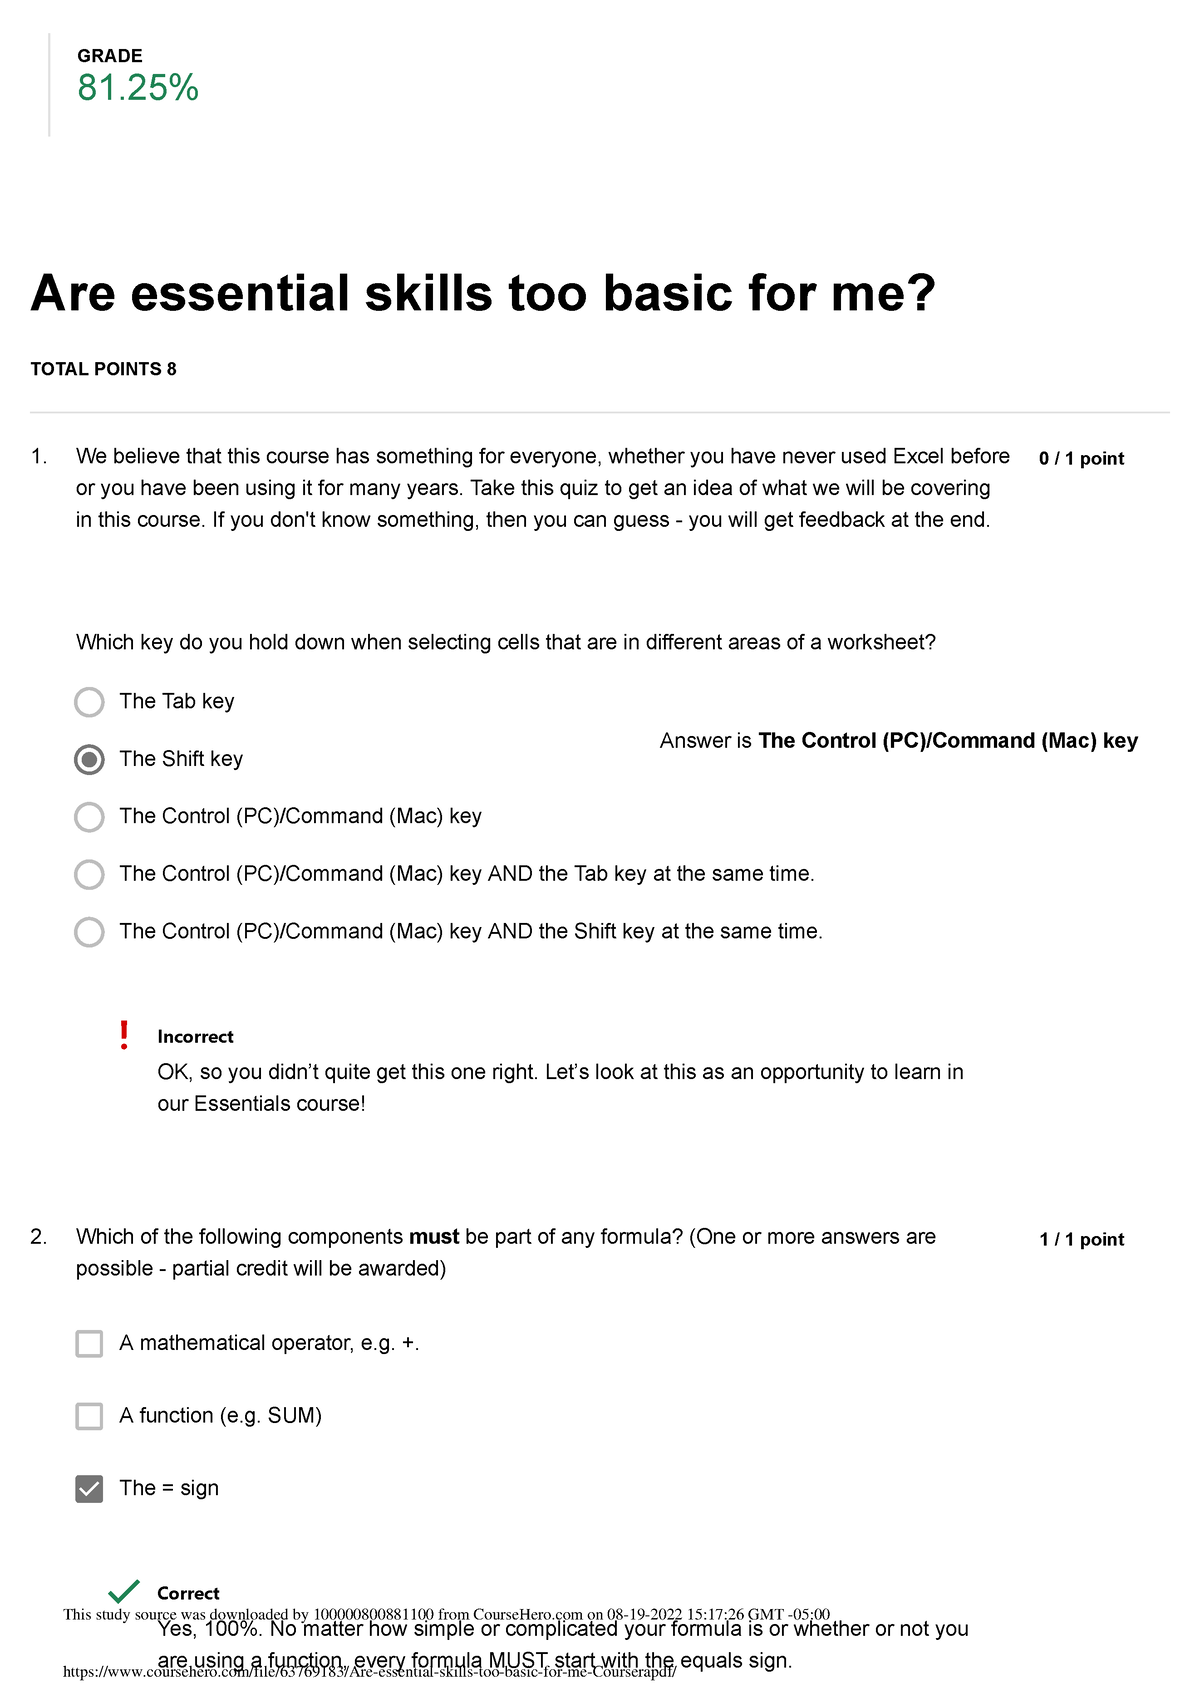 are-essential-skills-too-basic-for-me-coursera-grade-81-are